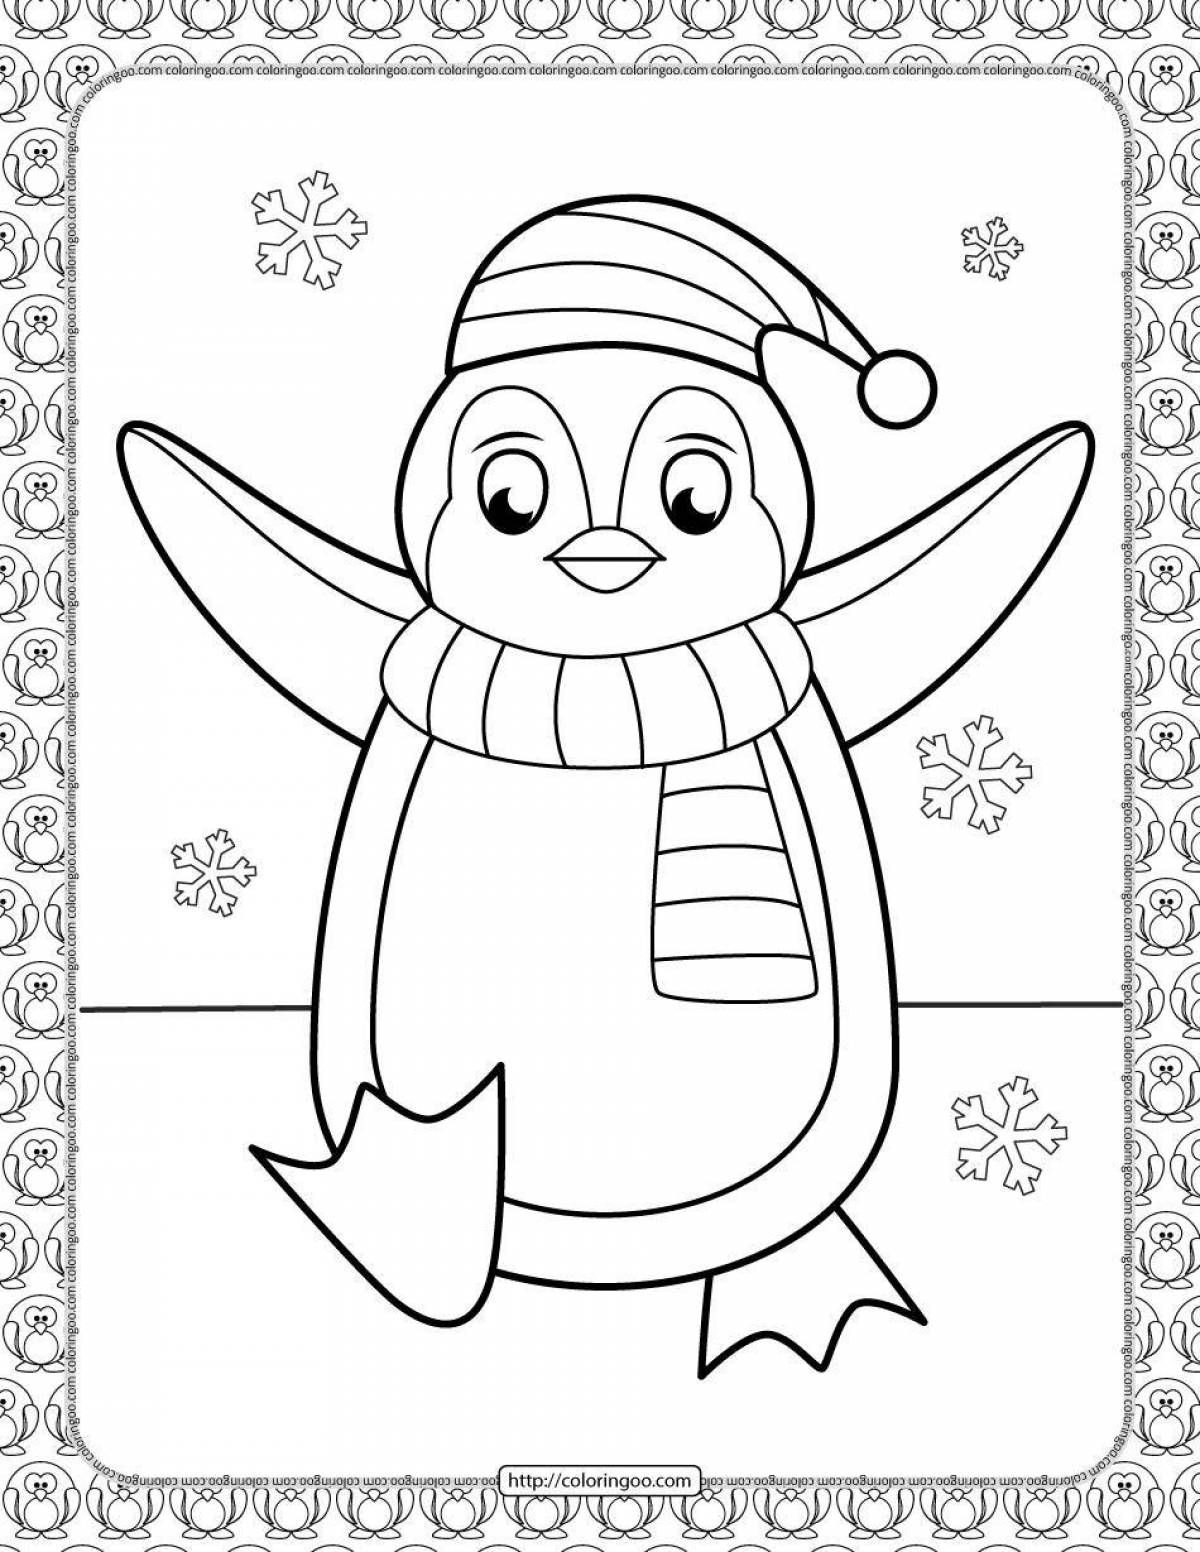 Magic penguin coloring pages for kids